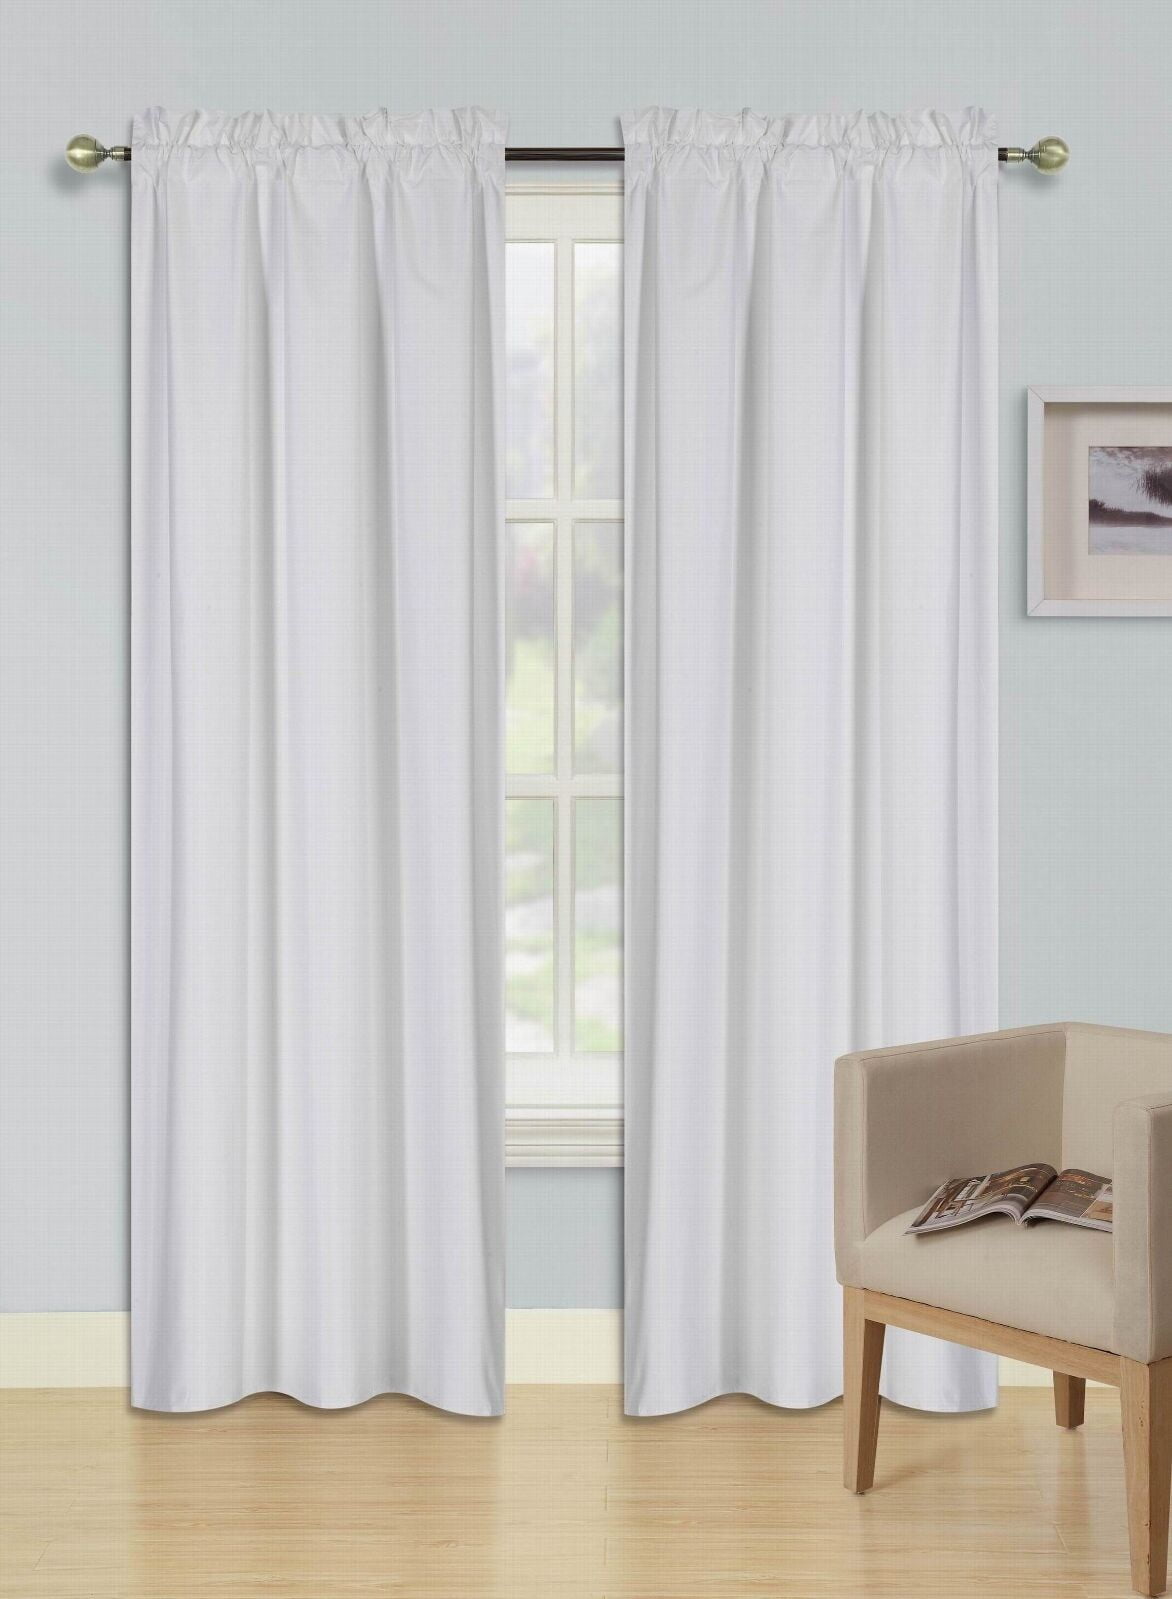 1 Set Rod Pocket Insulated Thermal Lined Blackout Window Curtain R64 Orange 